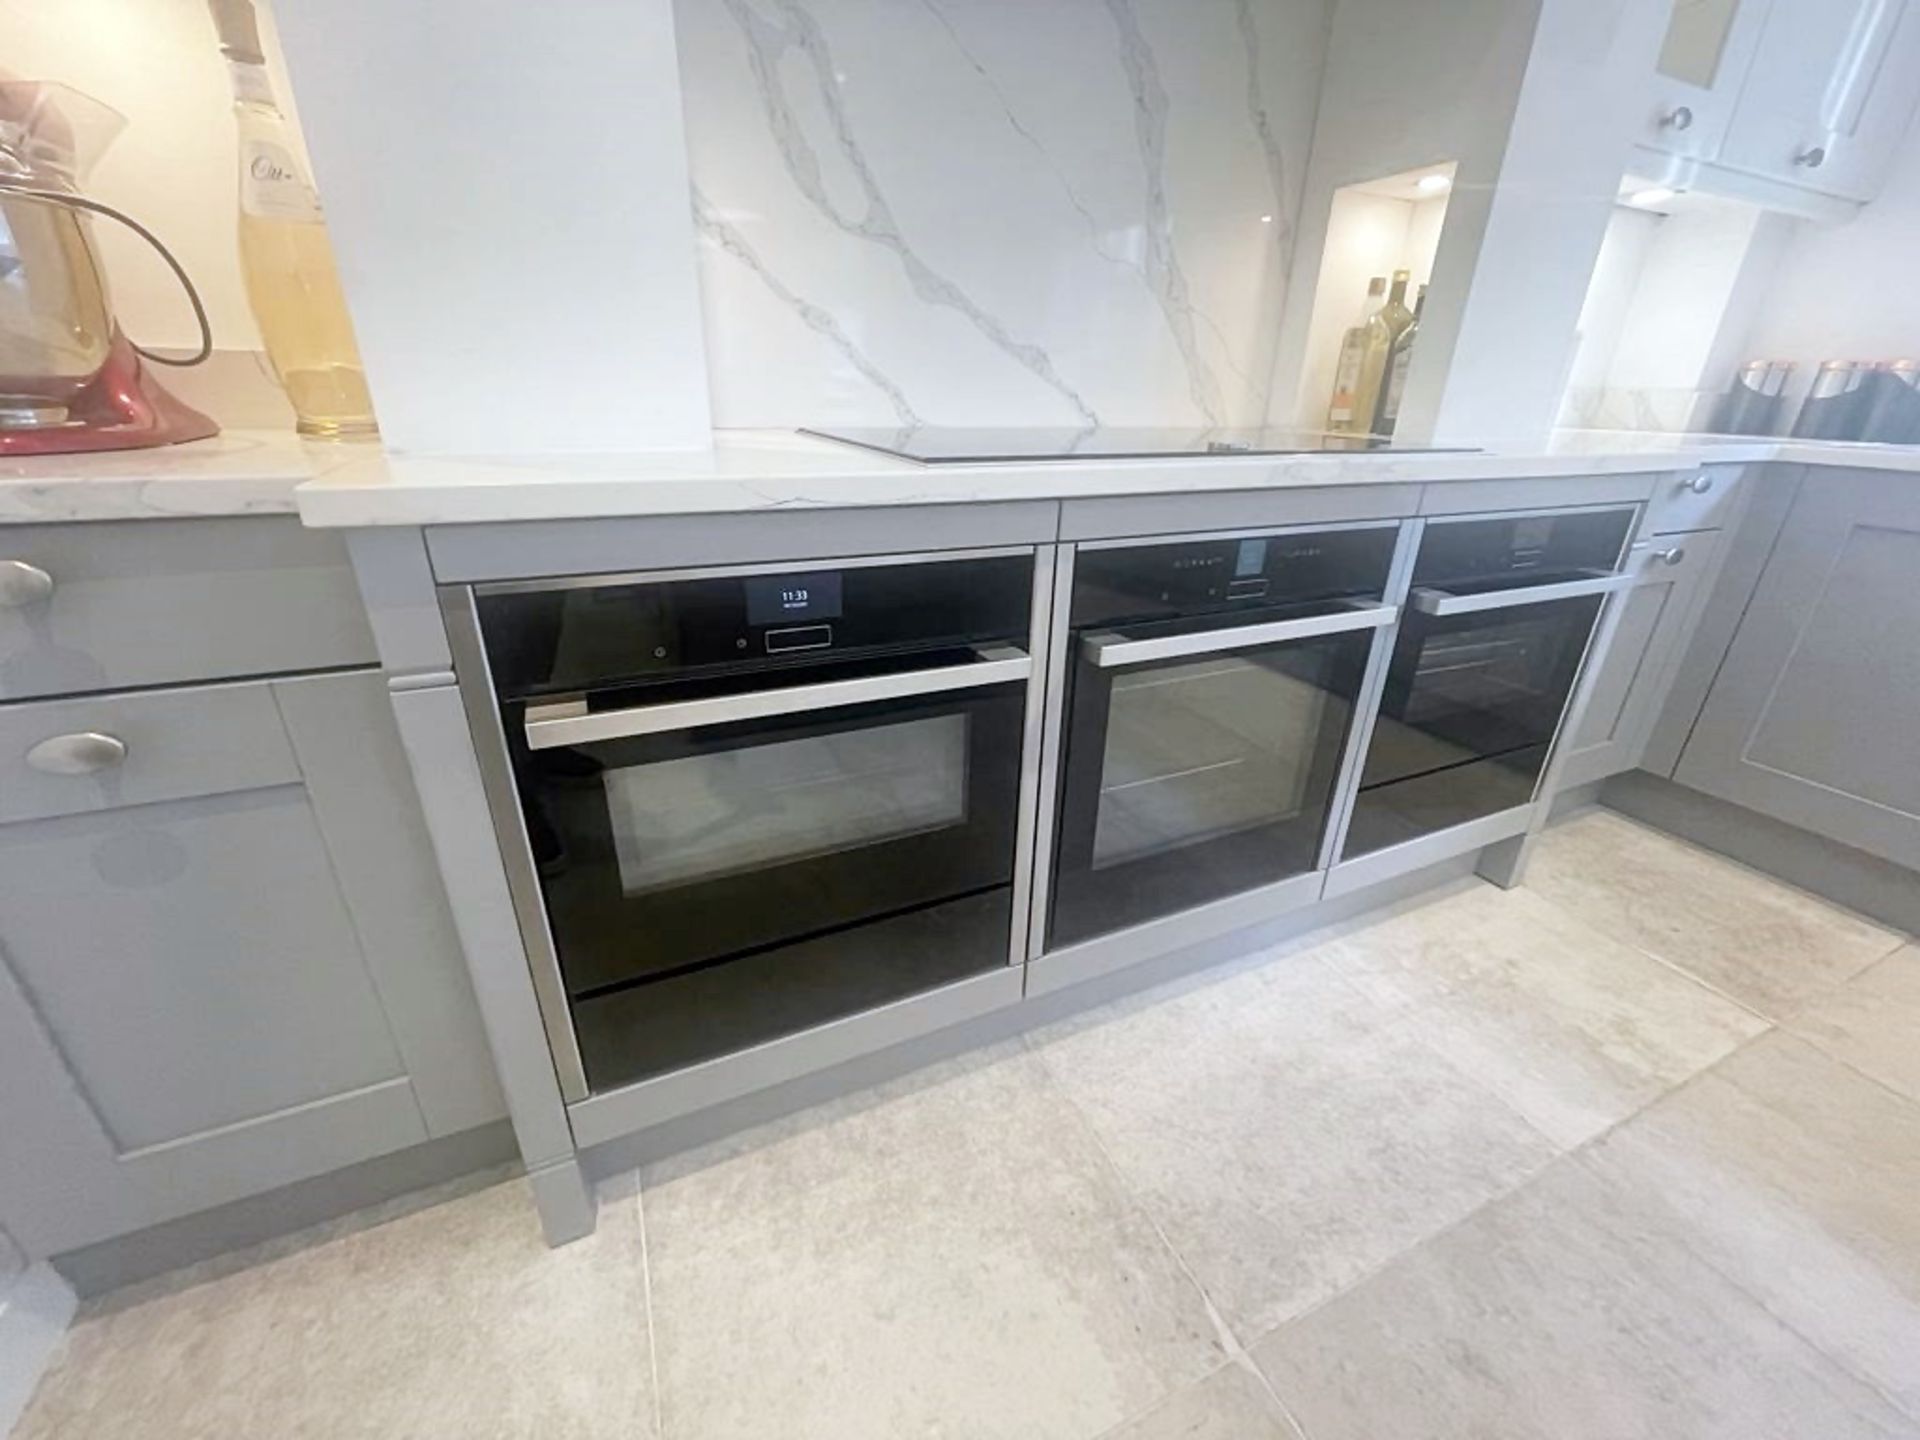 1 x SIEMATIC Bespoke Shaker-style Fitted Kitchen, Utility Room, Appliances & Modern Quartz Surfaces - Image 23 of 153